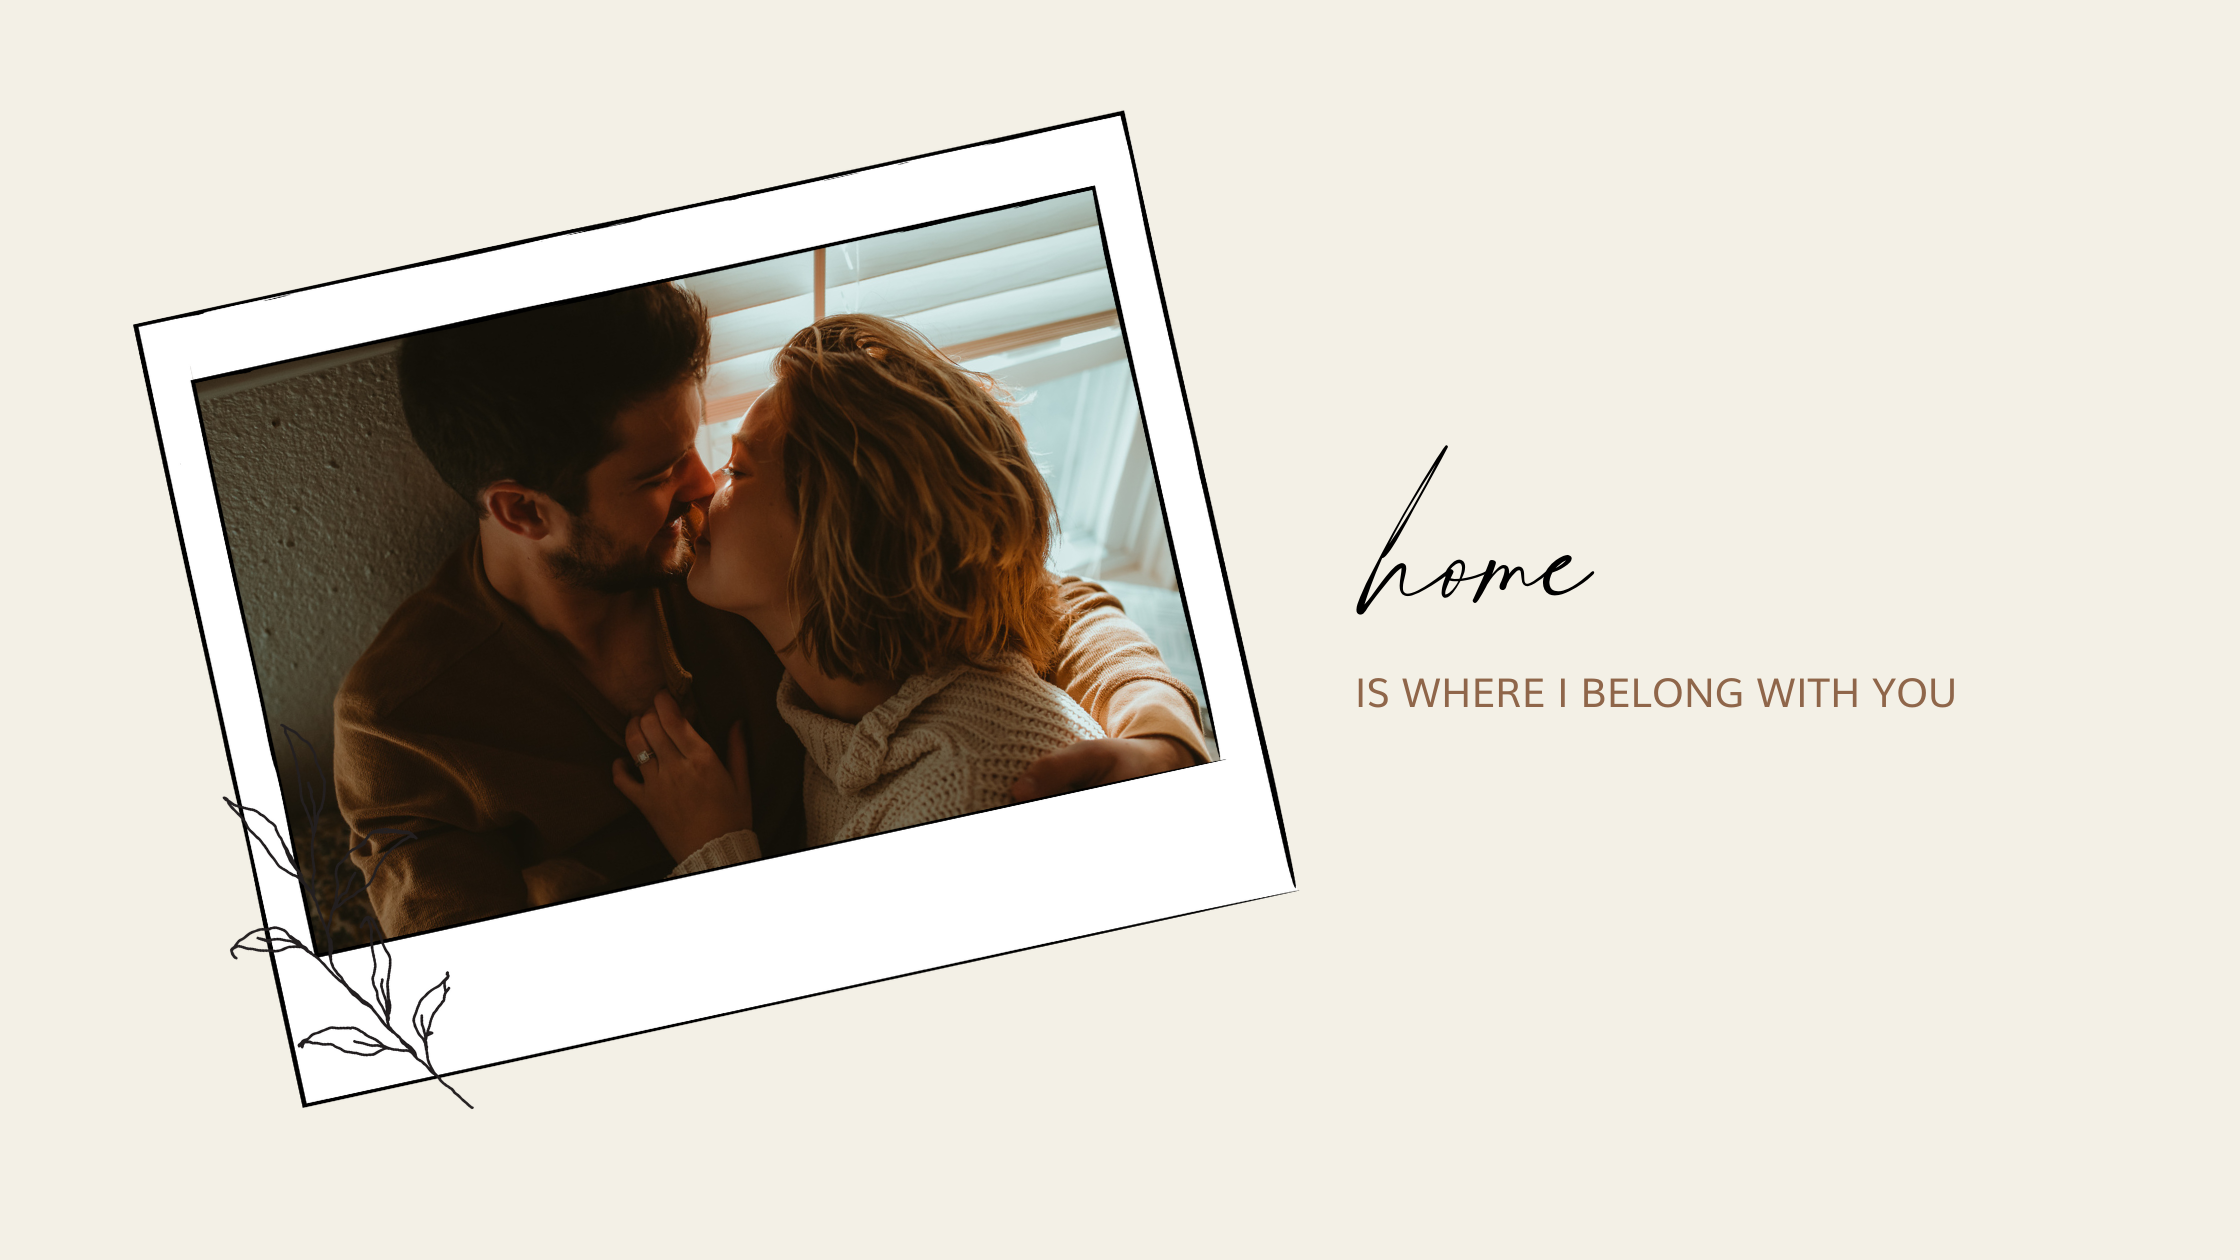 Polaroid style photo of couple snuggling on their bed by a window, quote next to them saying "Home is where I belong with you."